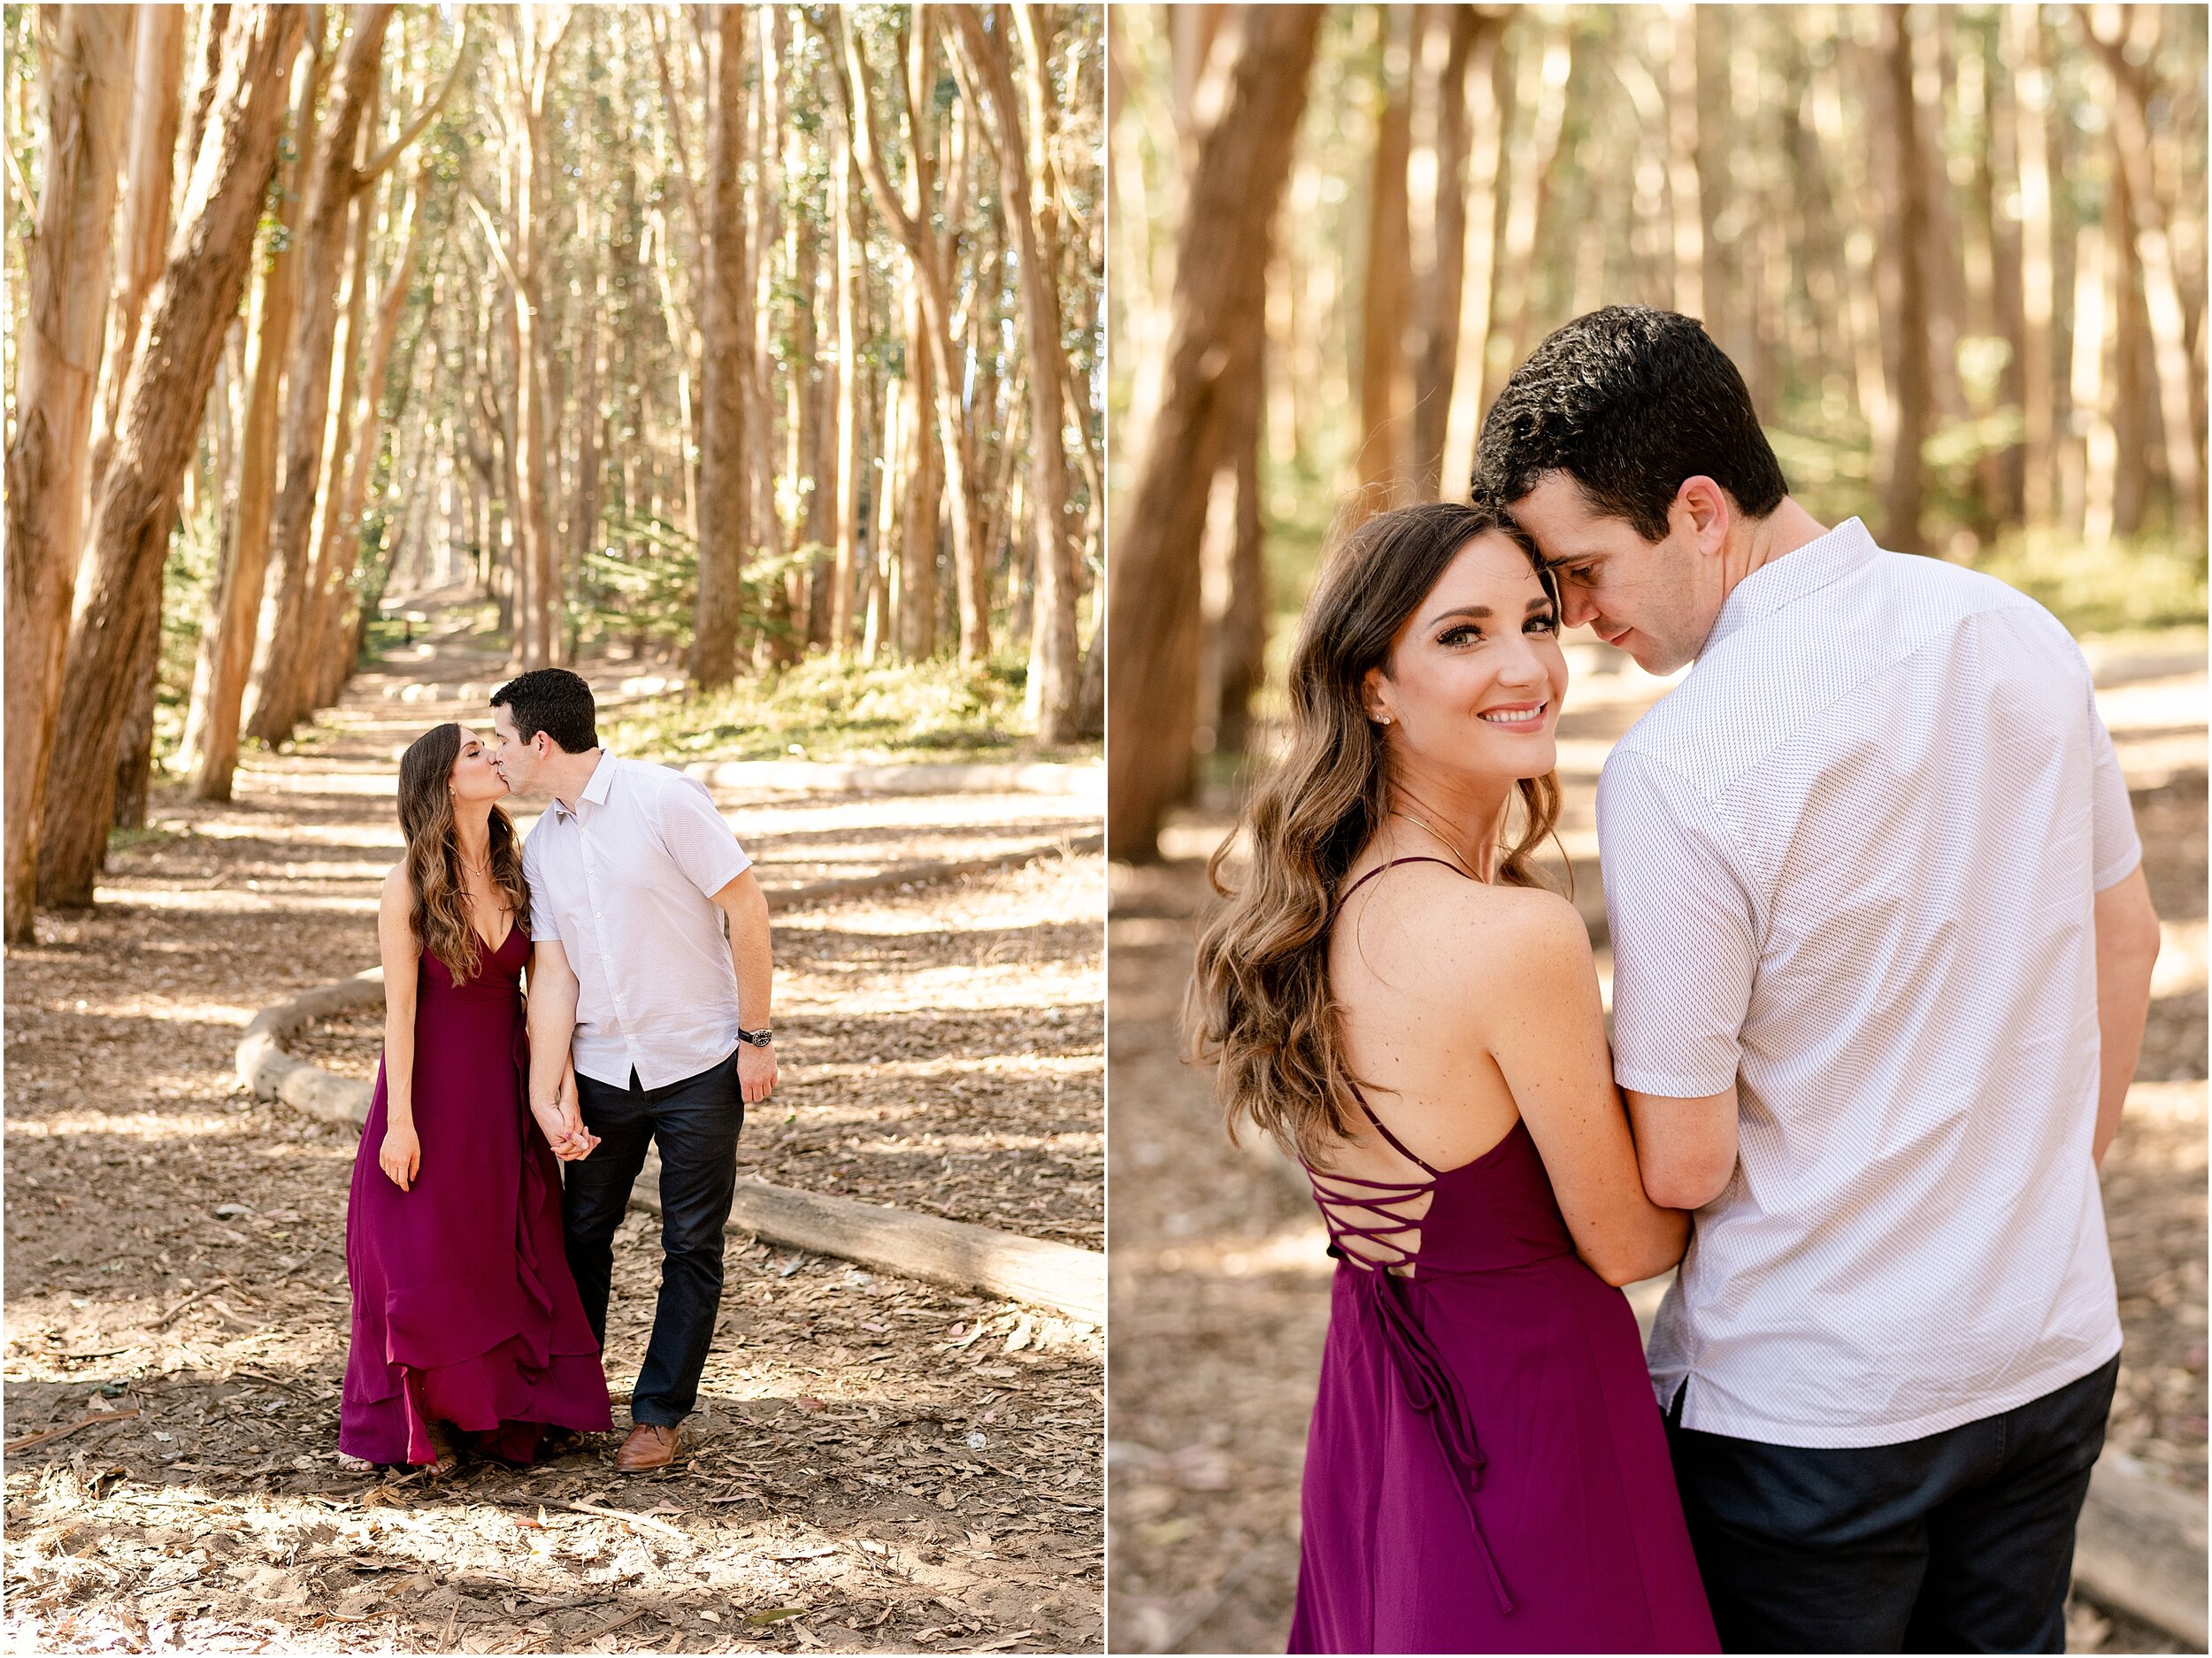 hannah leigh photography Baker Beach, Lovers Lane. Palace of Fine Arts Engagement Session San Franscico, CA_4815.jpg